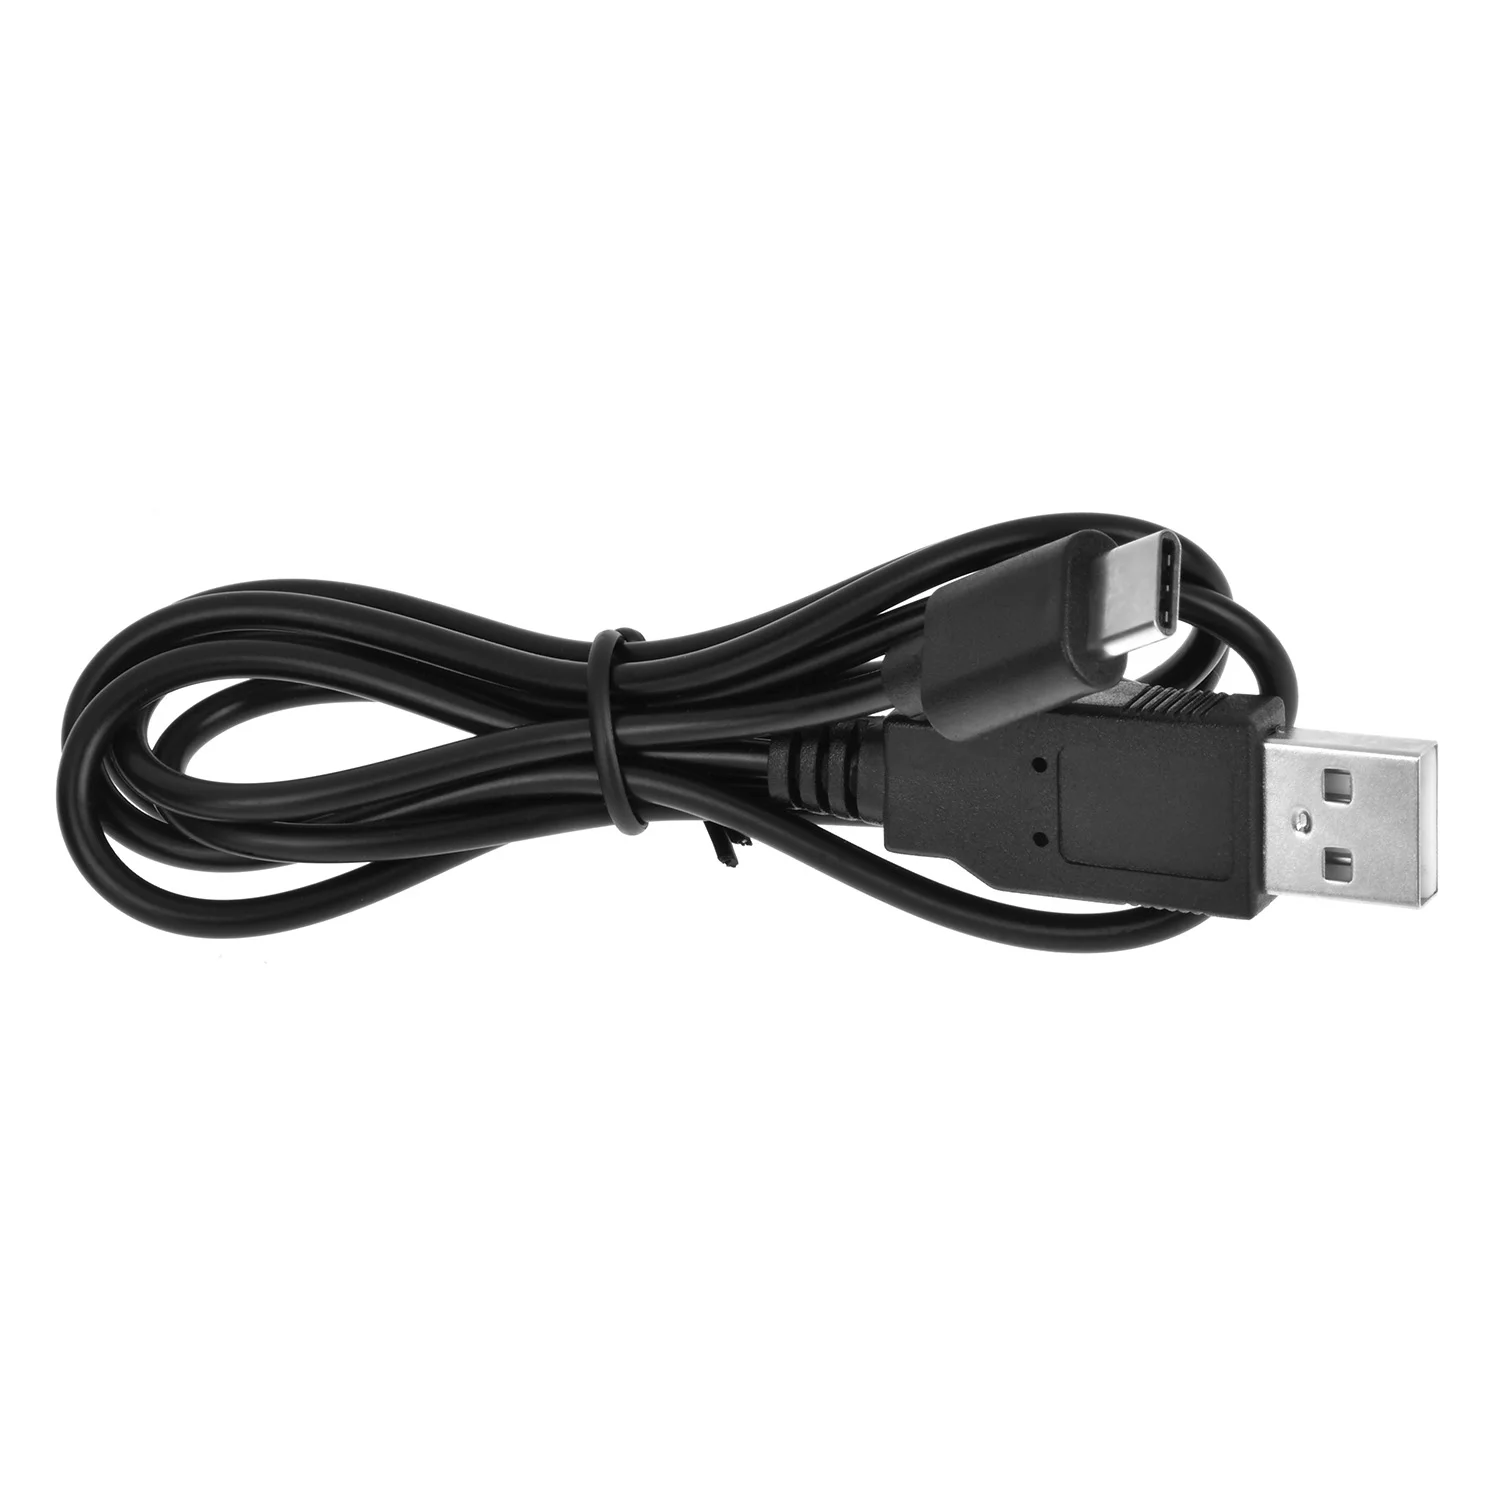 Helmet Communication Systems Accessories for BT-S2 Type C_Charging Cable Motorcycle Bluetooth Headset 